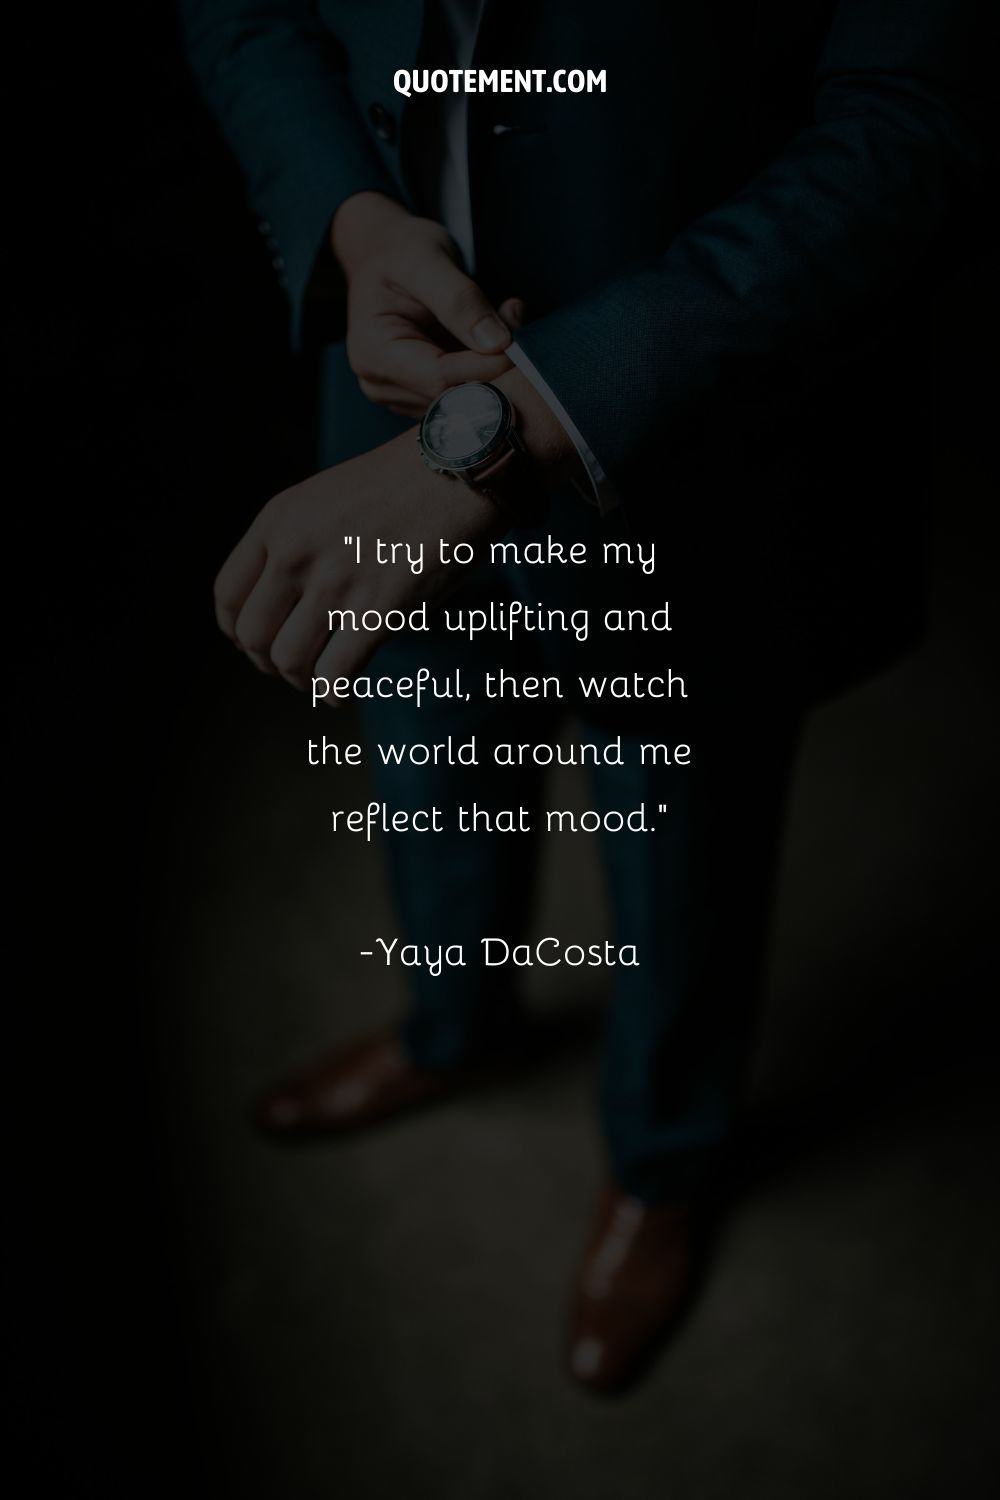 man with a watch representing quote on uplifting mood